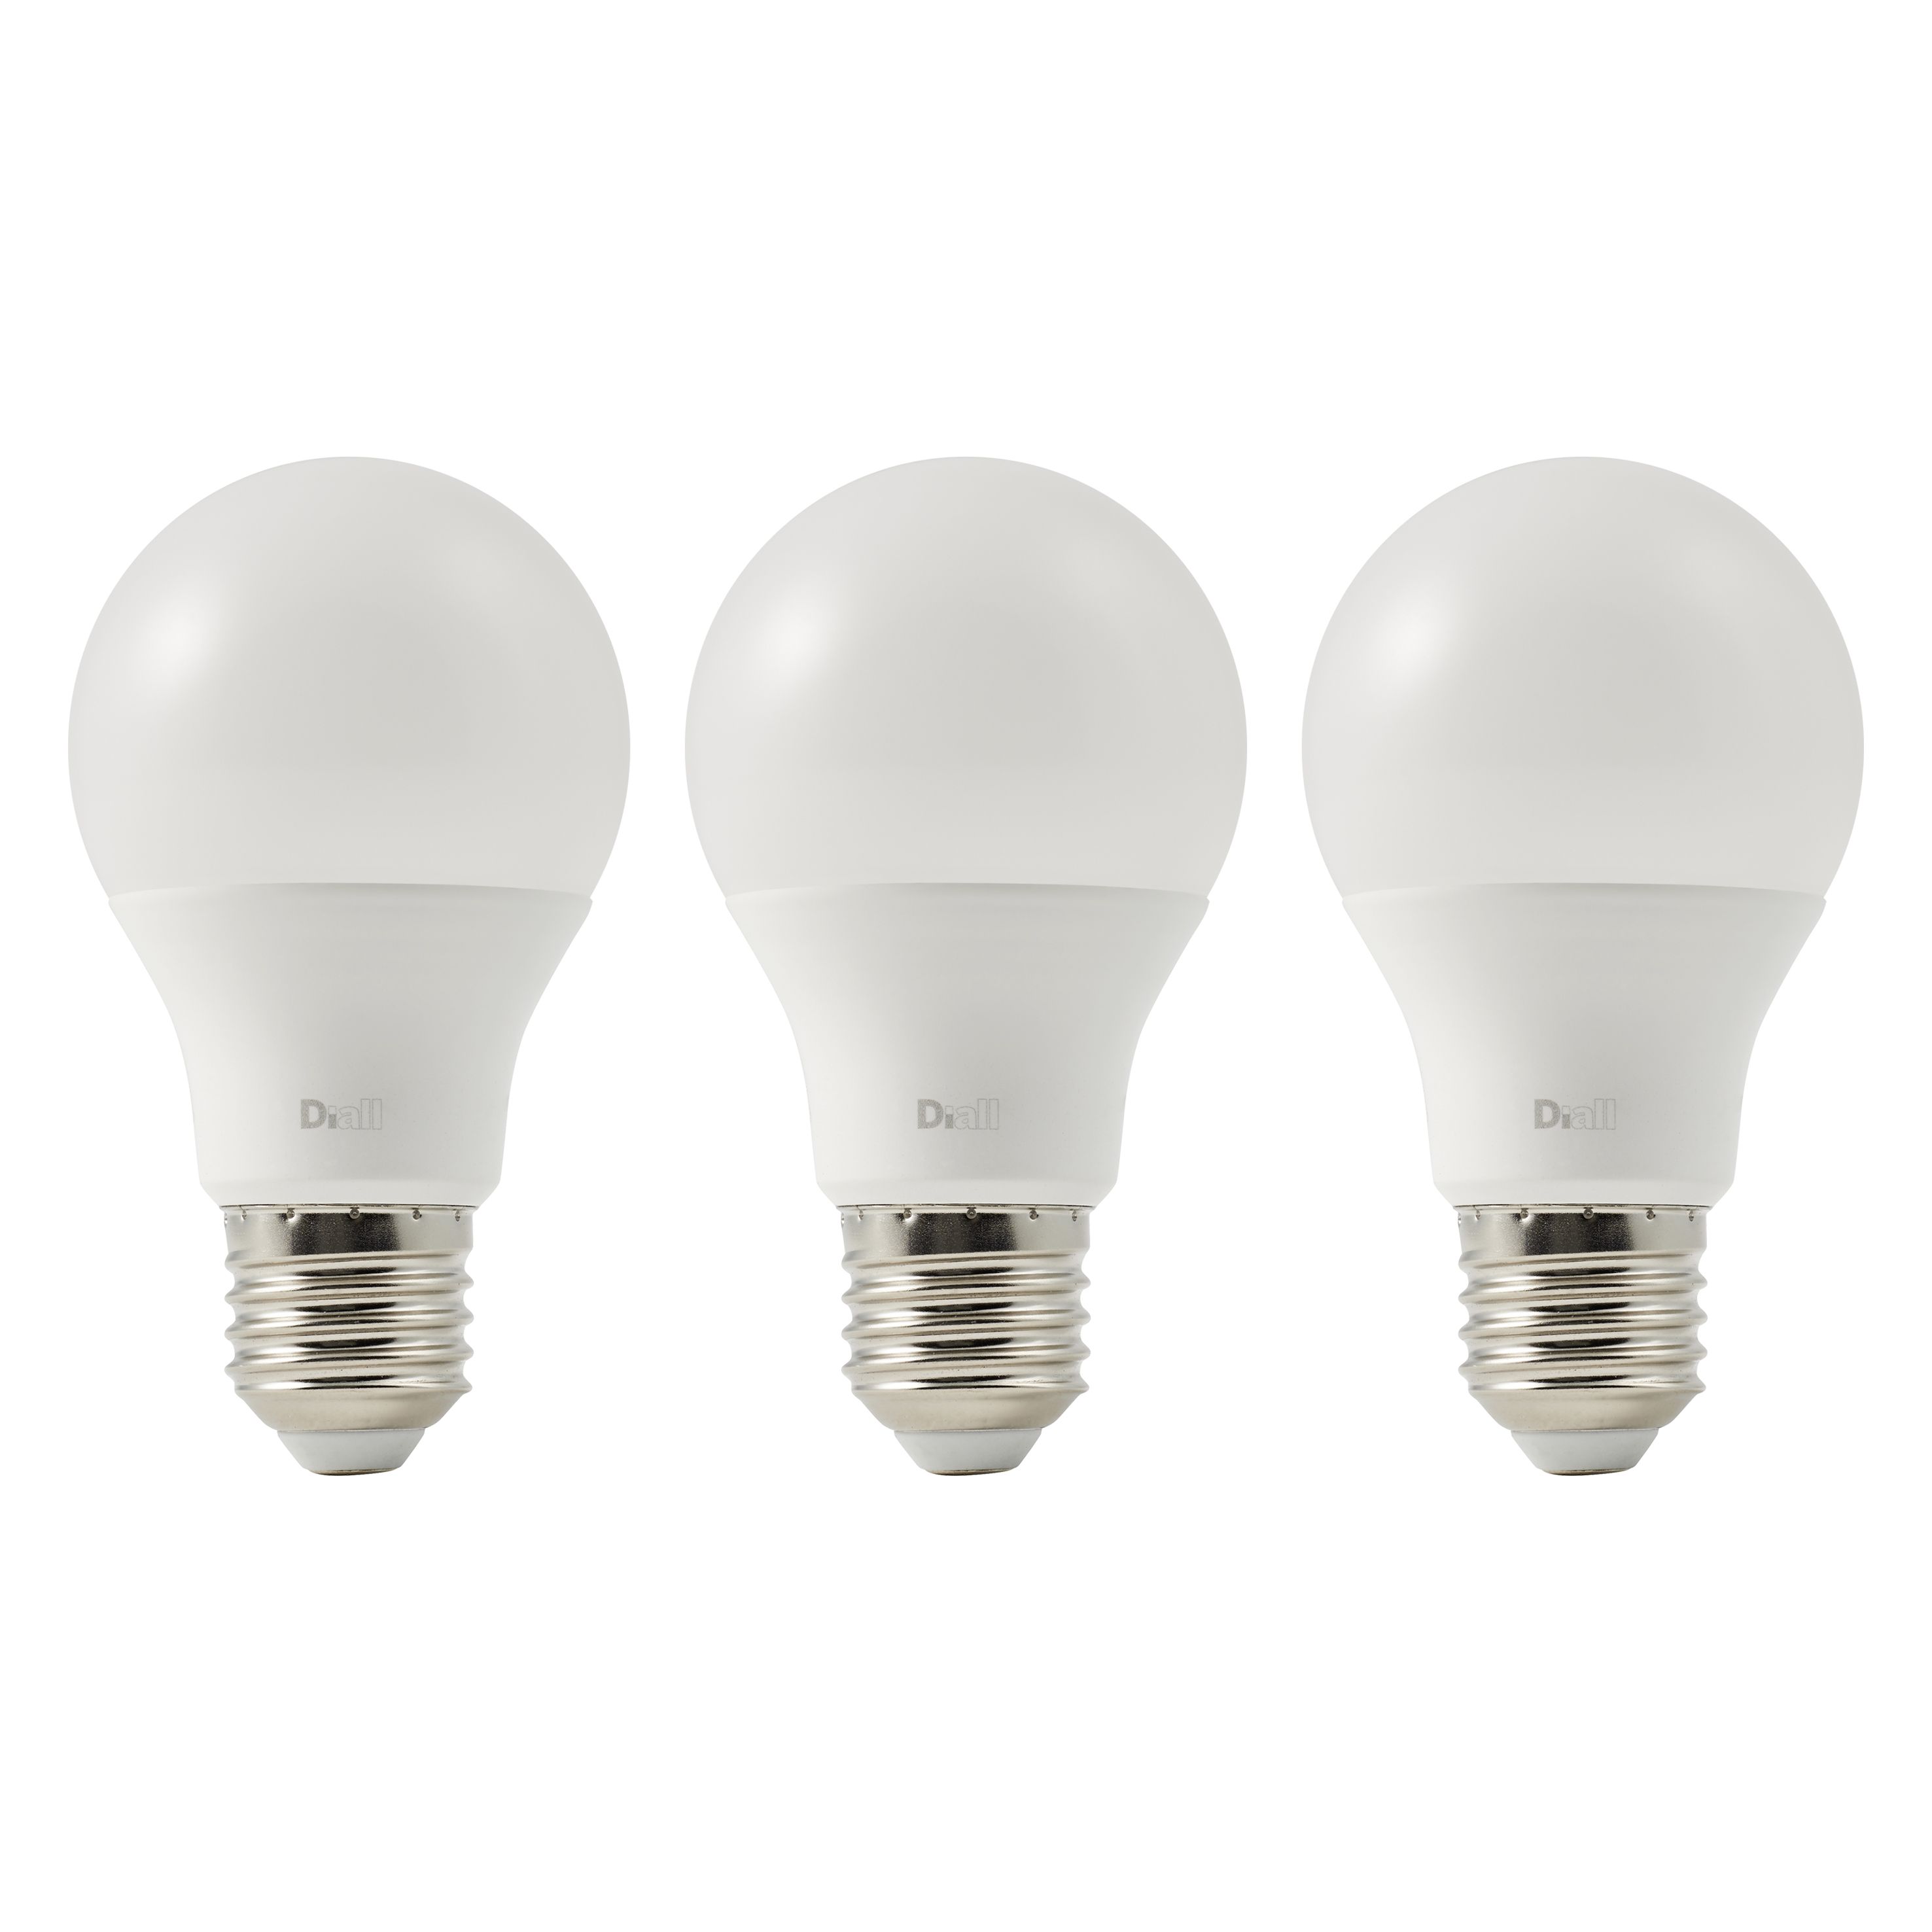 Diall E27 7.3W 806lm White A60 Warm white LED Light bulb, Pack of 3